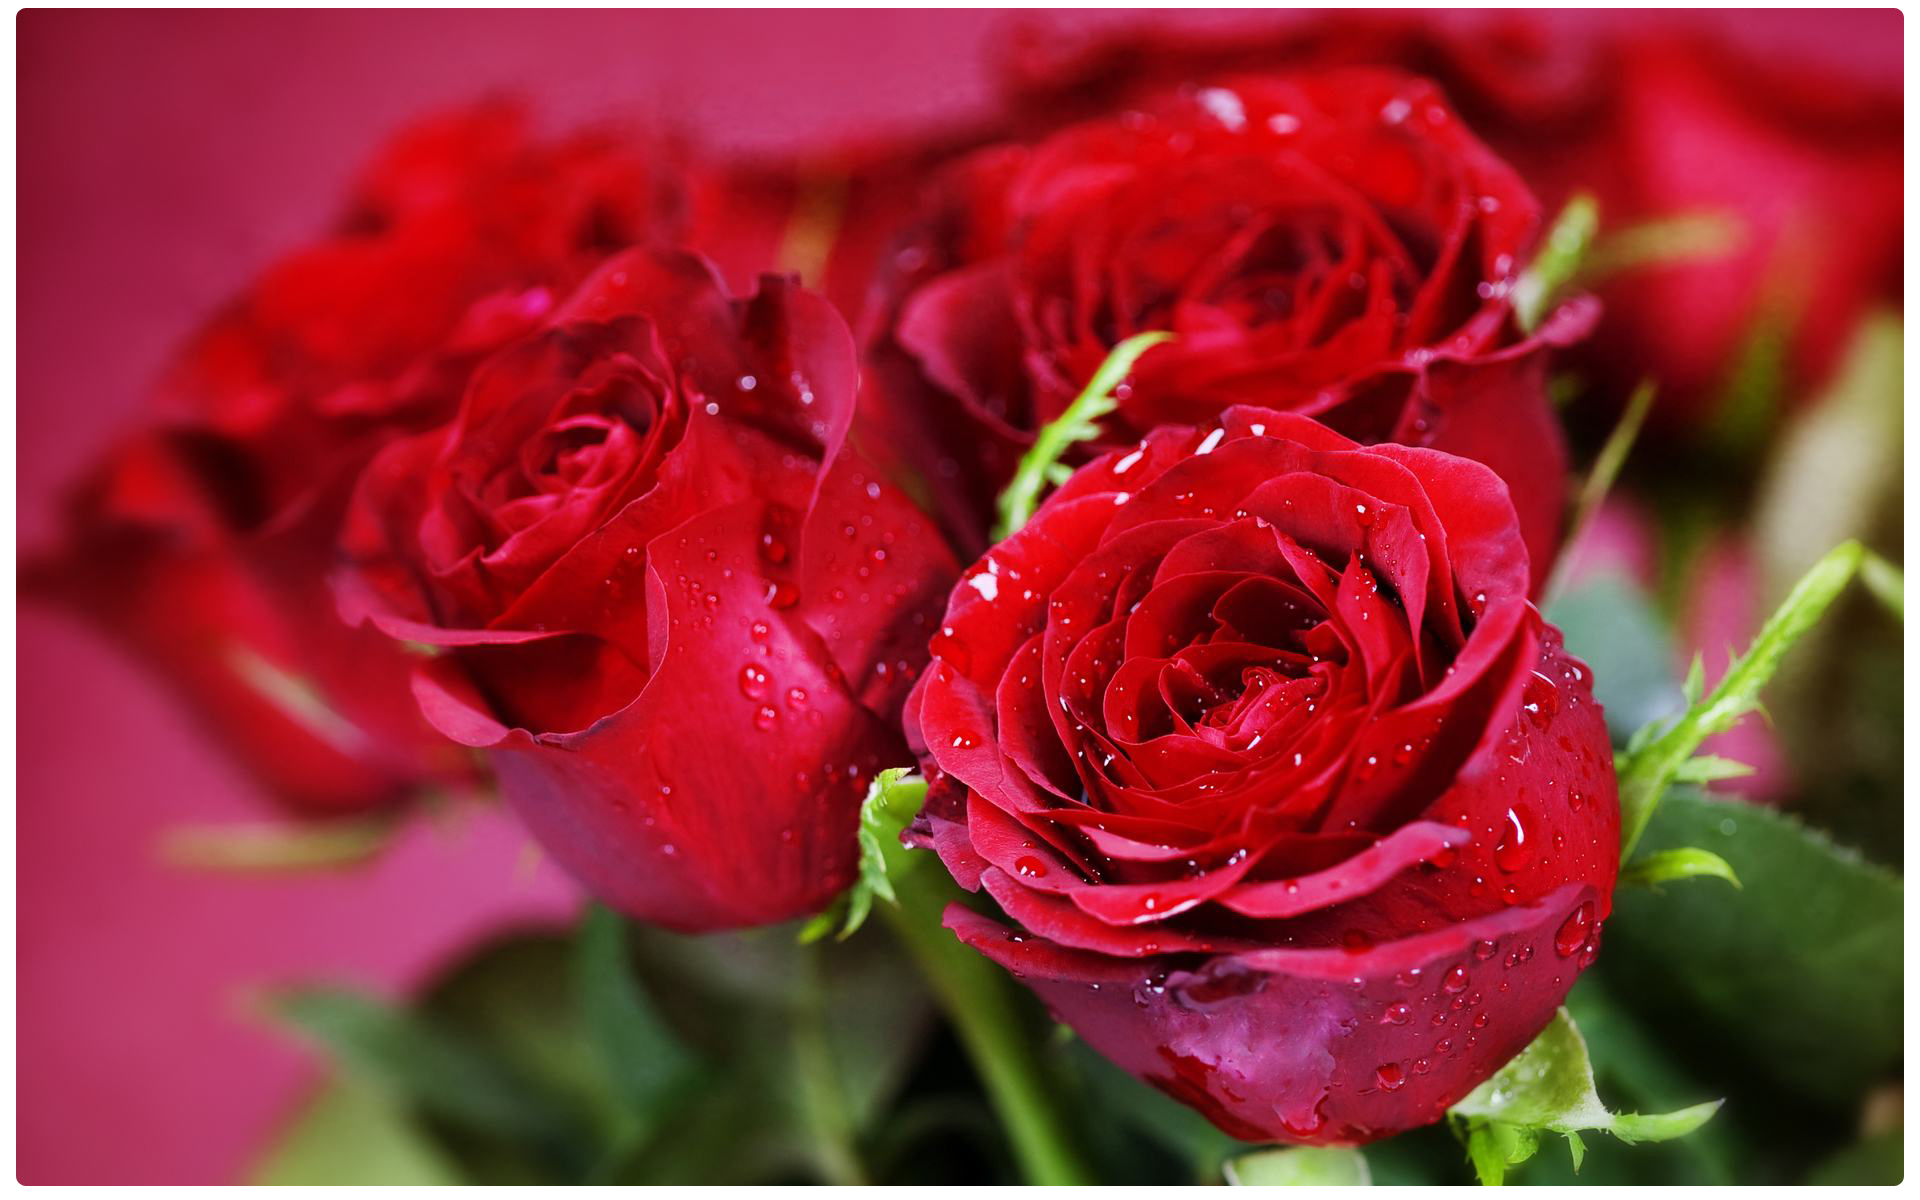 196033_nature flowers bouquets rose red close macro holidays valentine plants_1920x1200